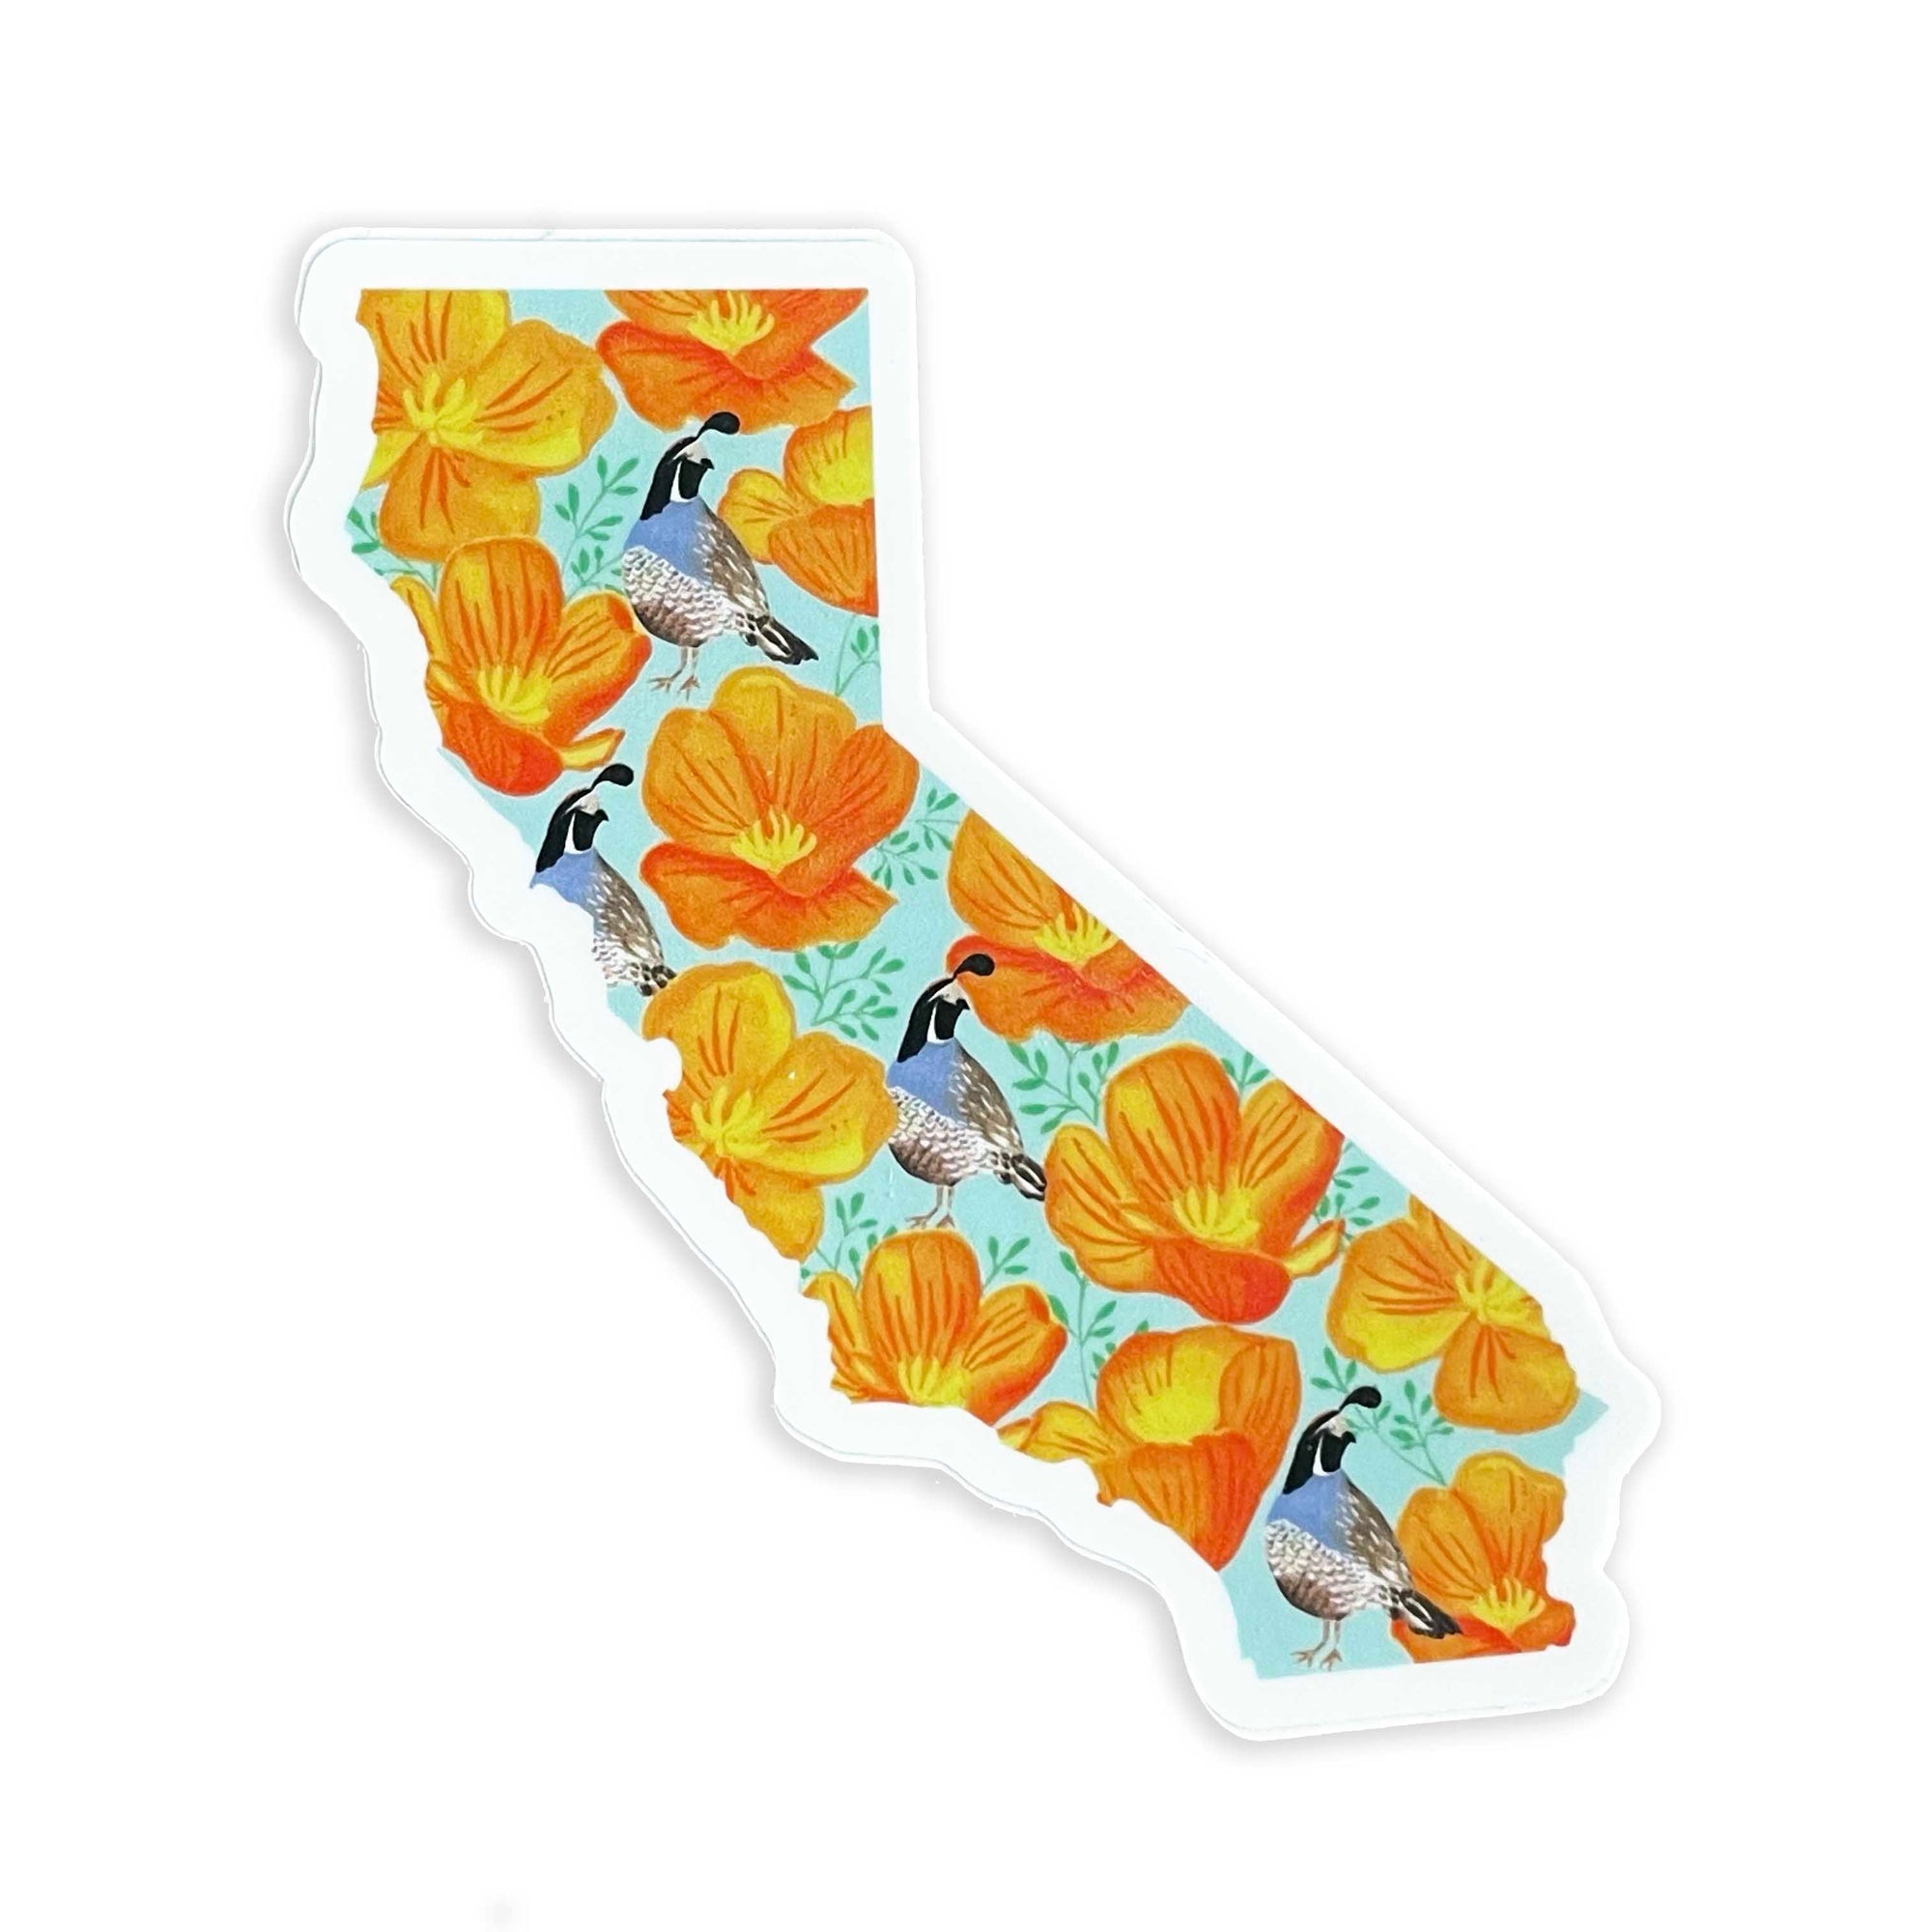 Sticker in the shape of California with orange poppies and state bird inside the state shape